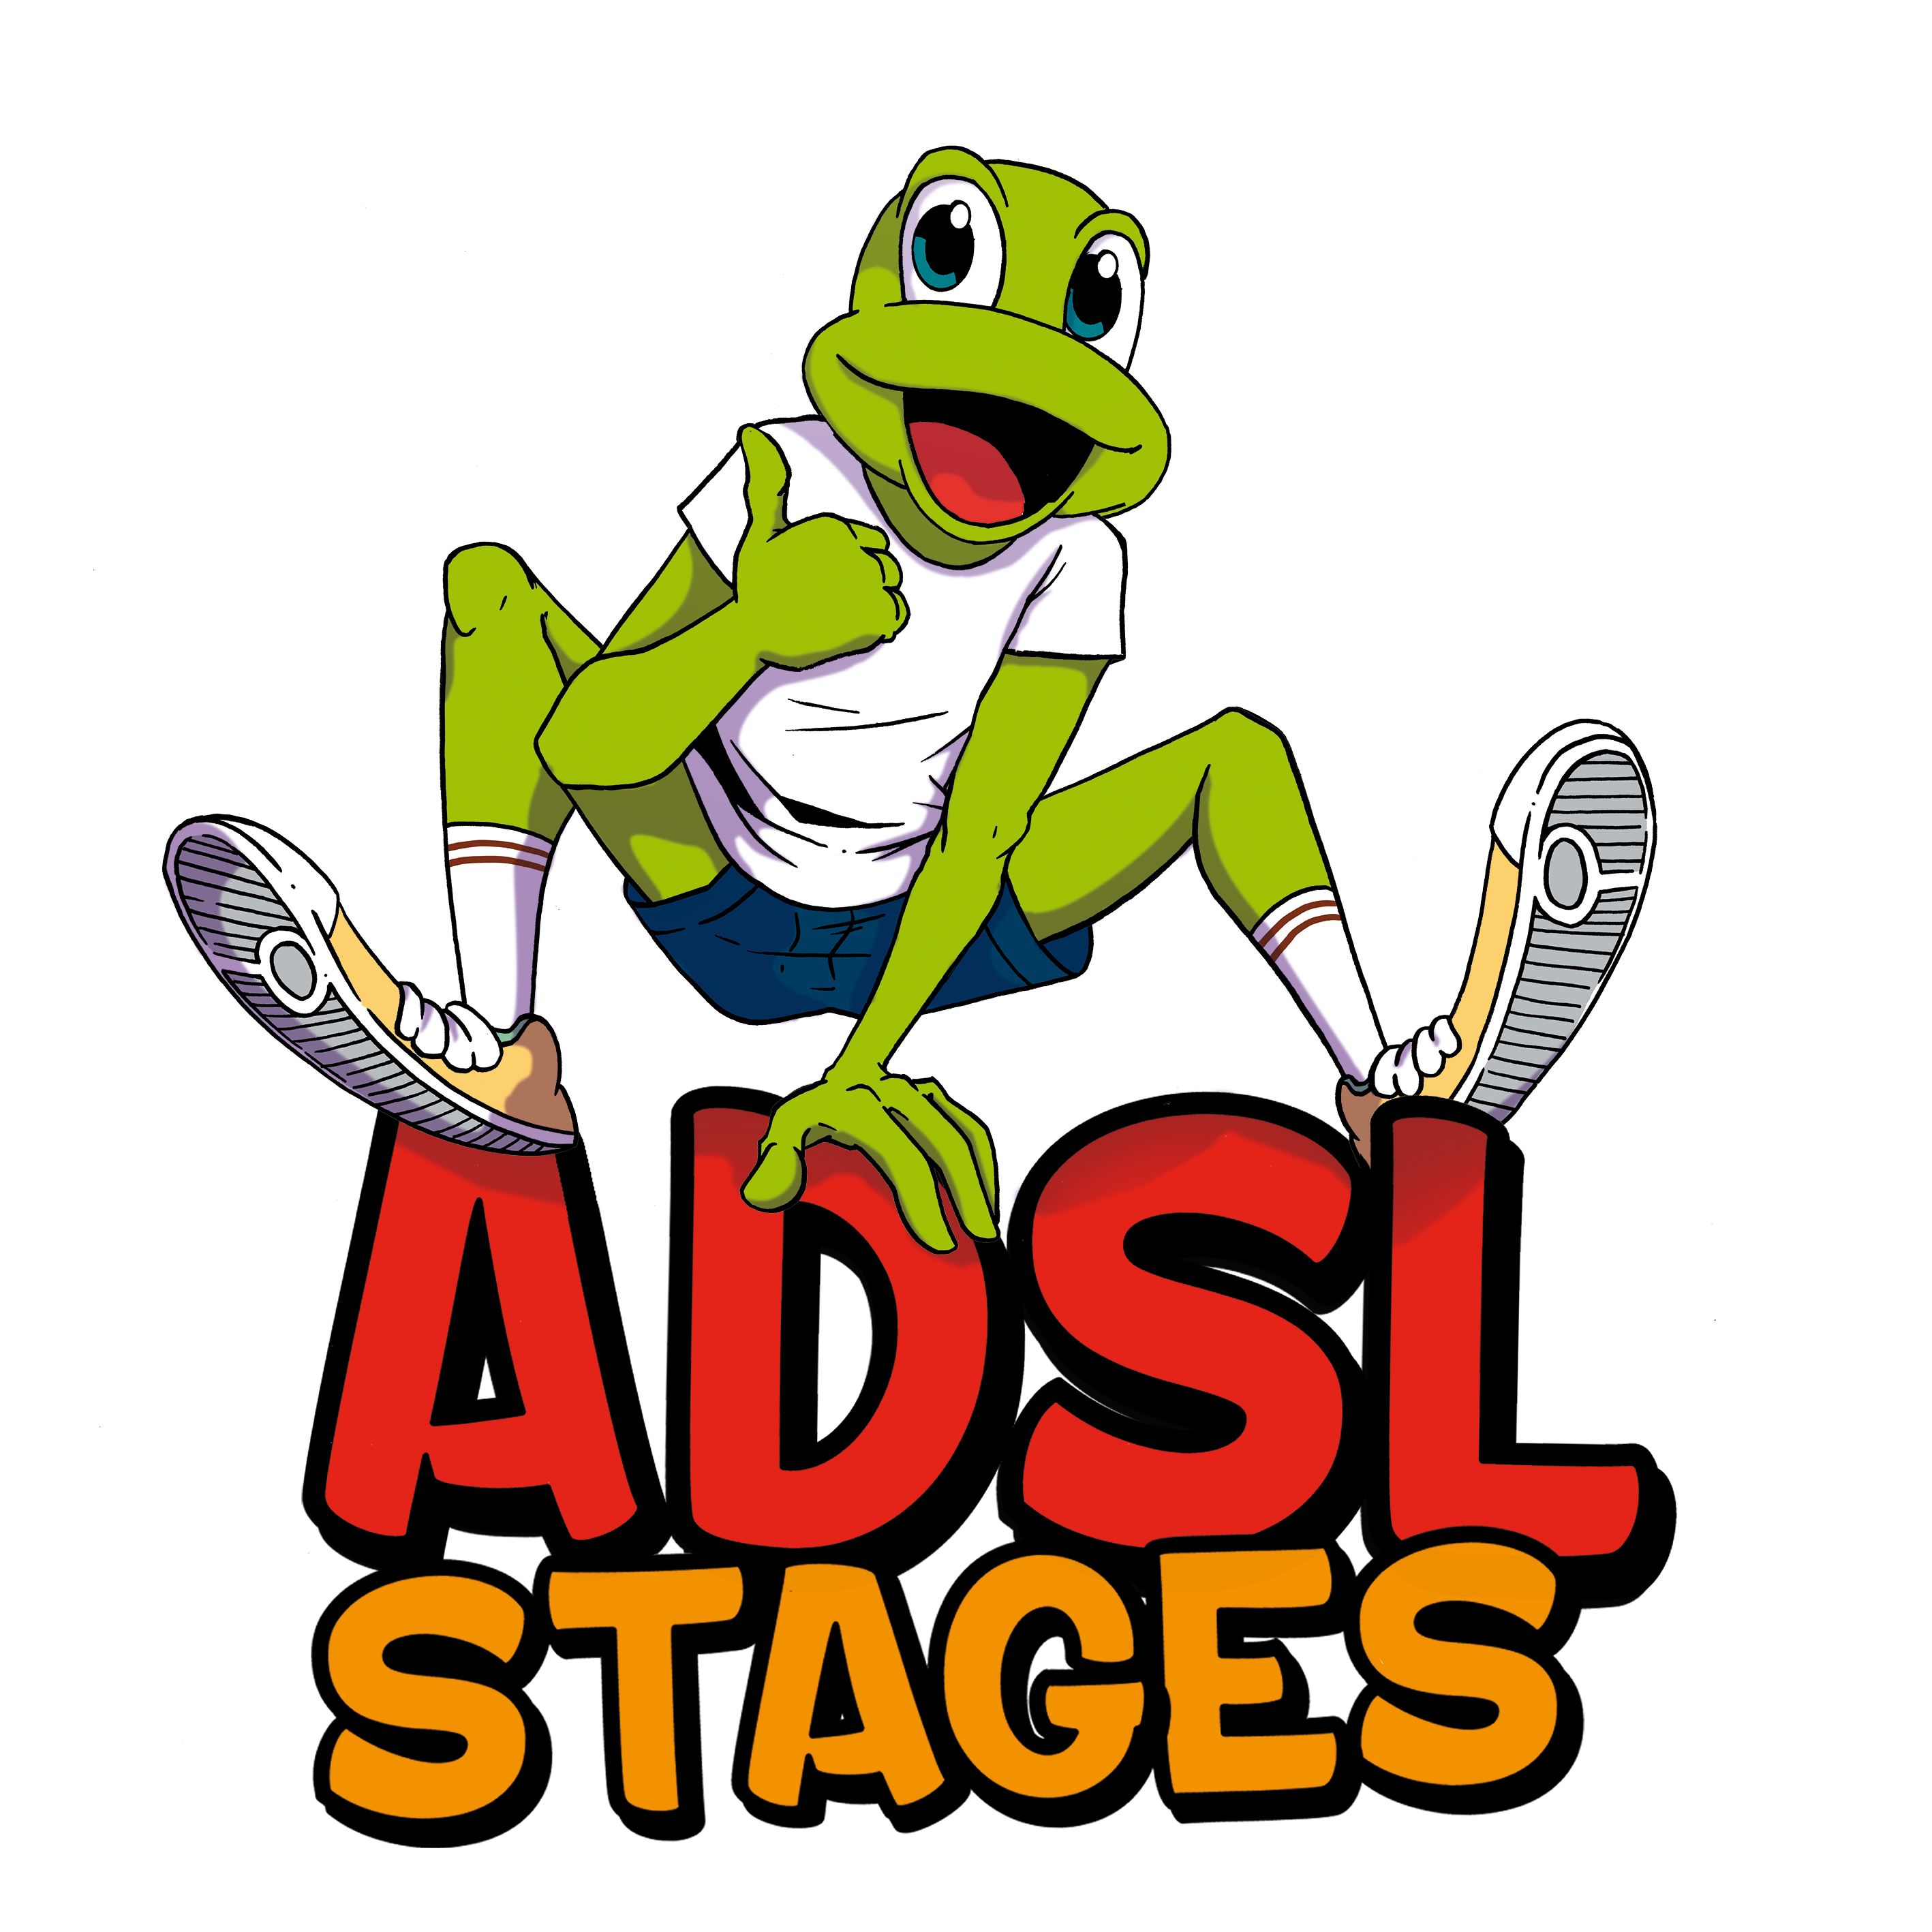 ADSL Stages